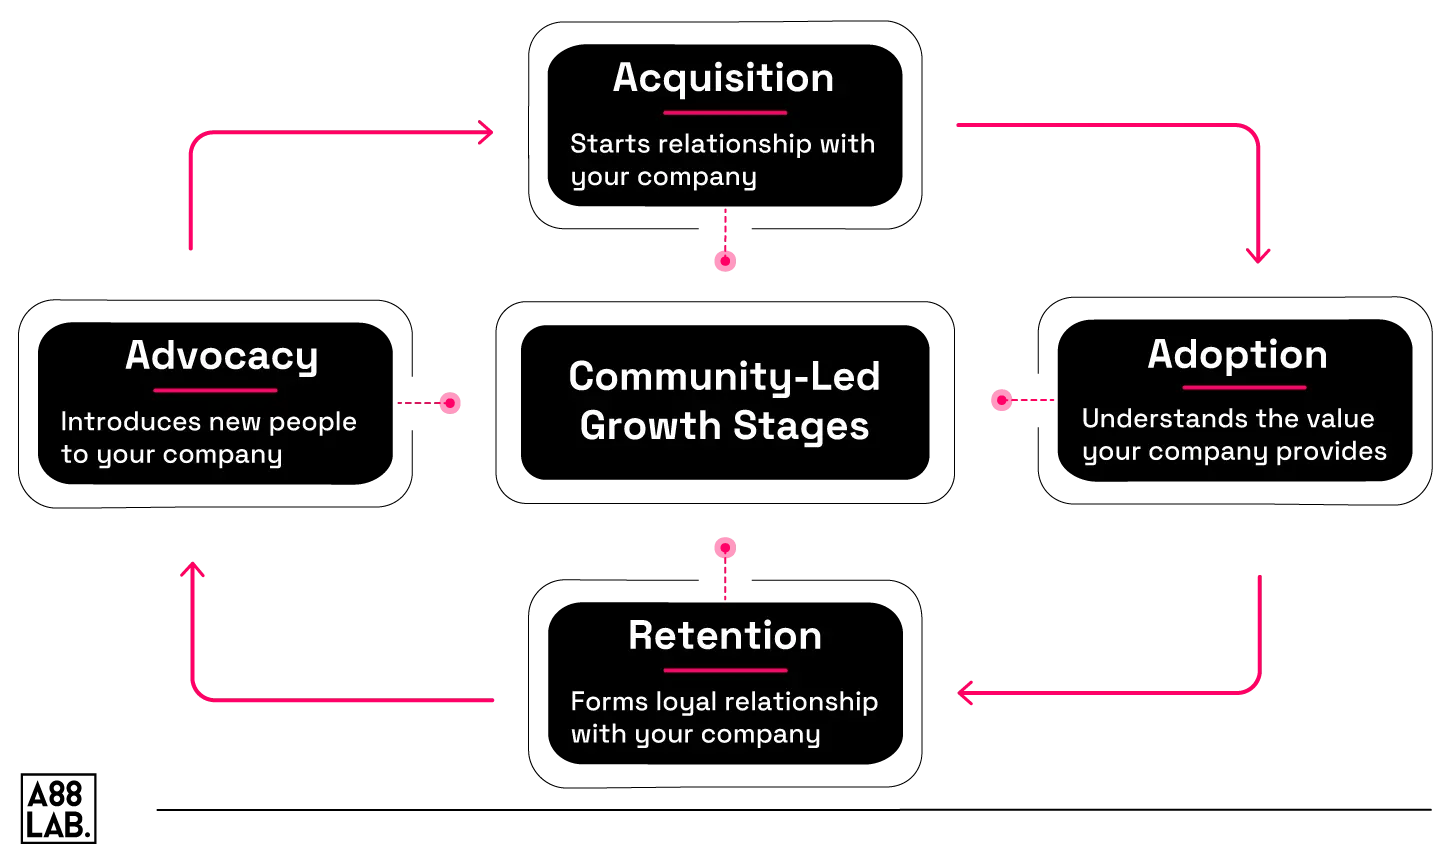 Community-Led-Growth-Stages